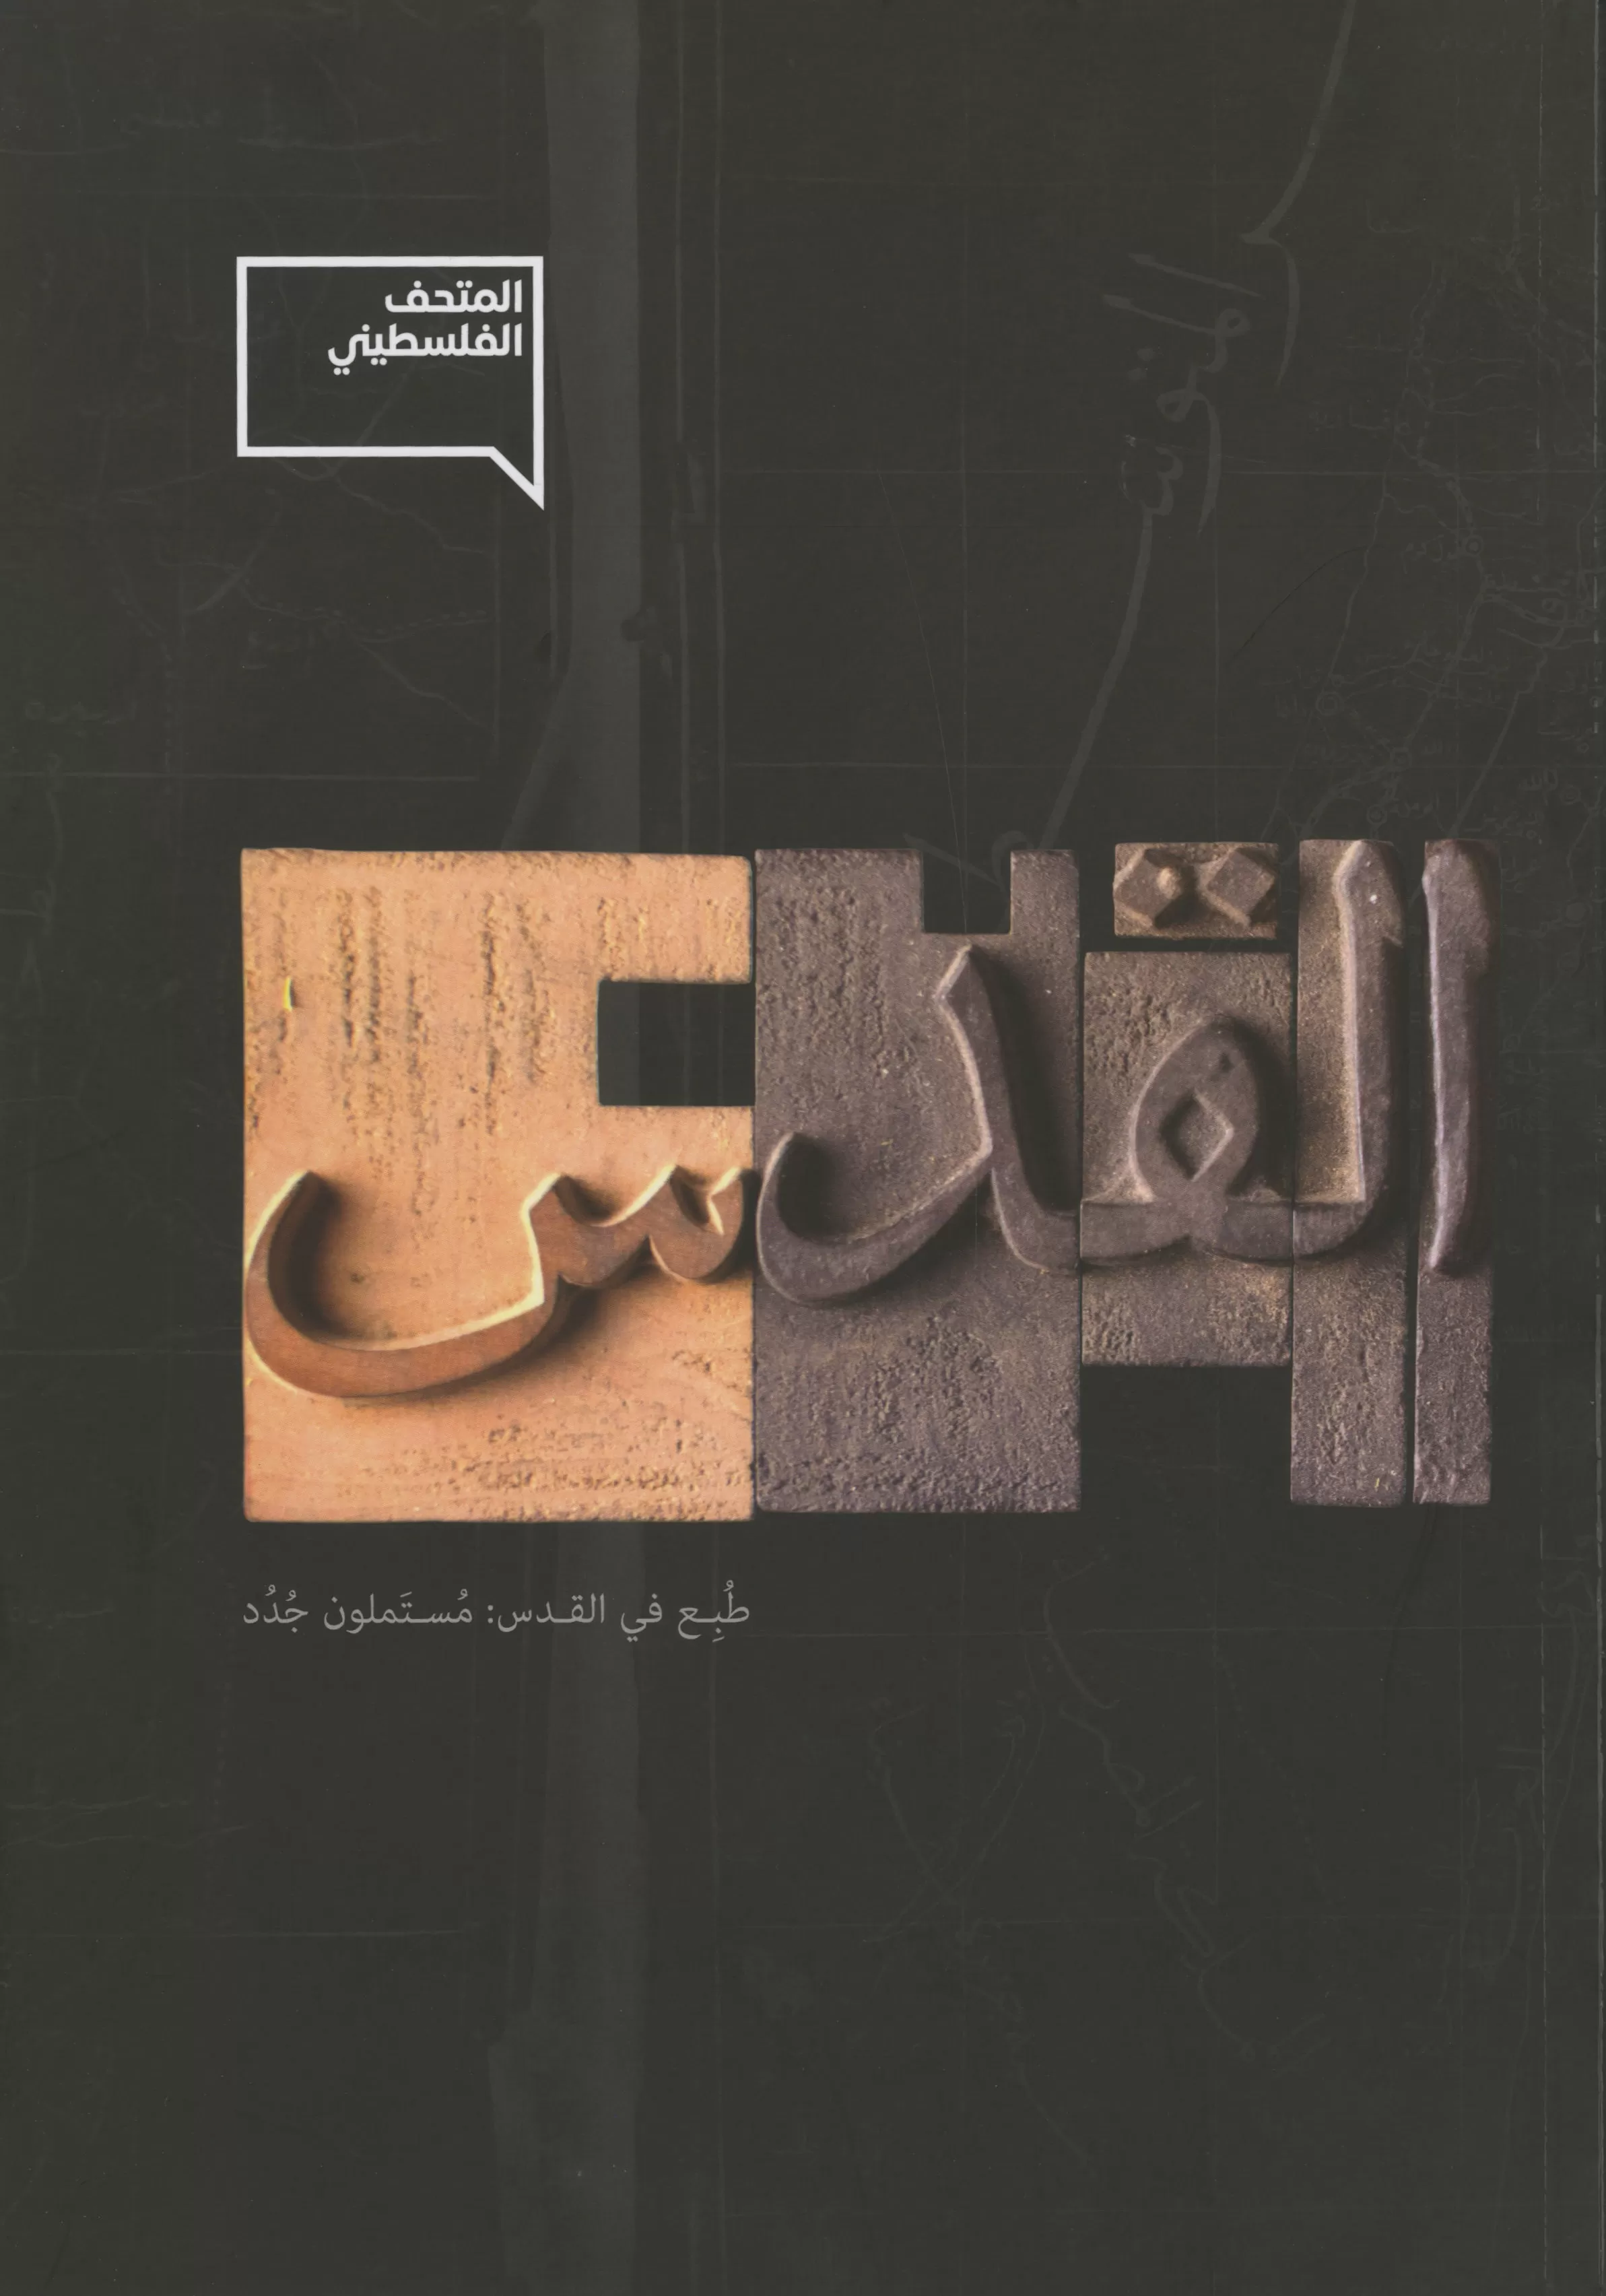 Book cover "Printed in Jerusalem Mustamloun" (Exhibition catalogue)